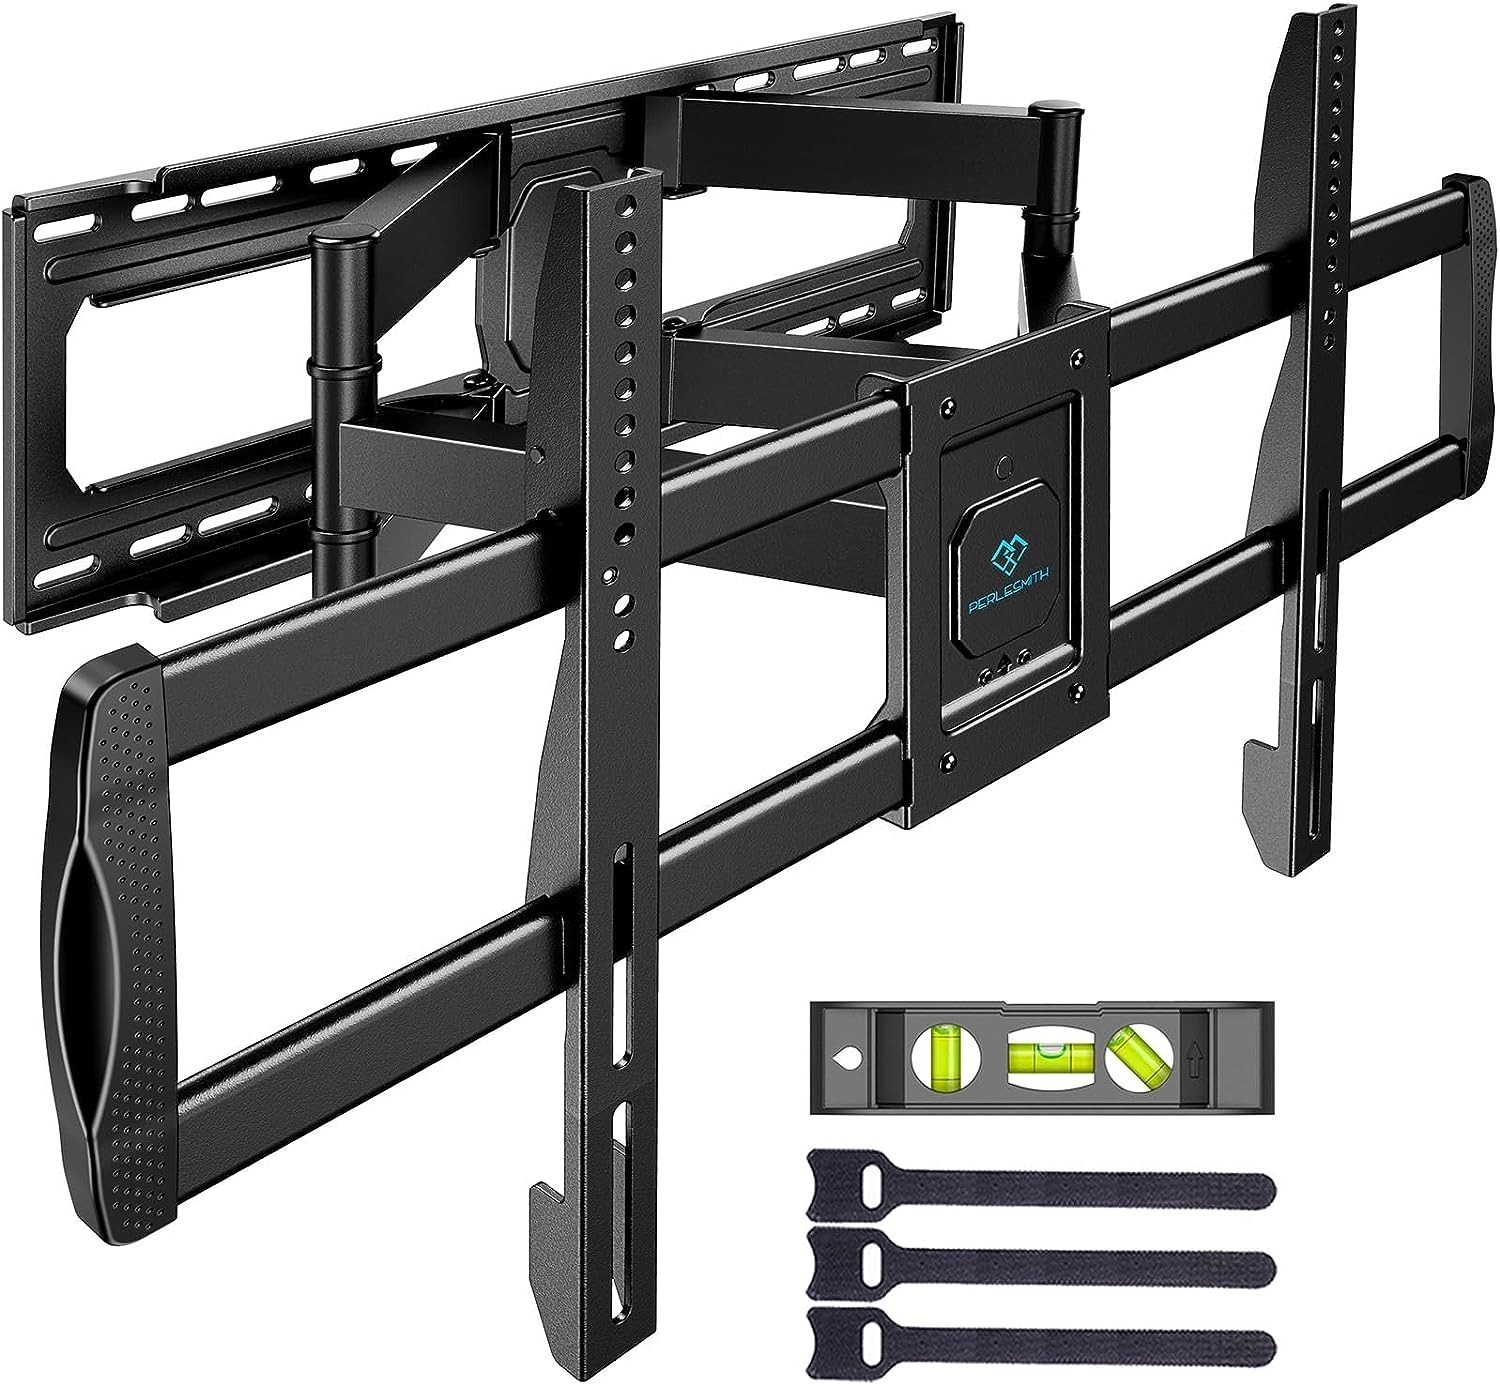 Prime Members: PERLESMITH Full Motion Swivel, Tilt, & Extend TV Wall Mount (for 50-90" TVs, up to 165lbs) $43 + Free Shipping